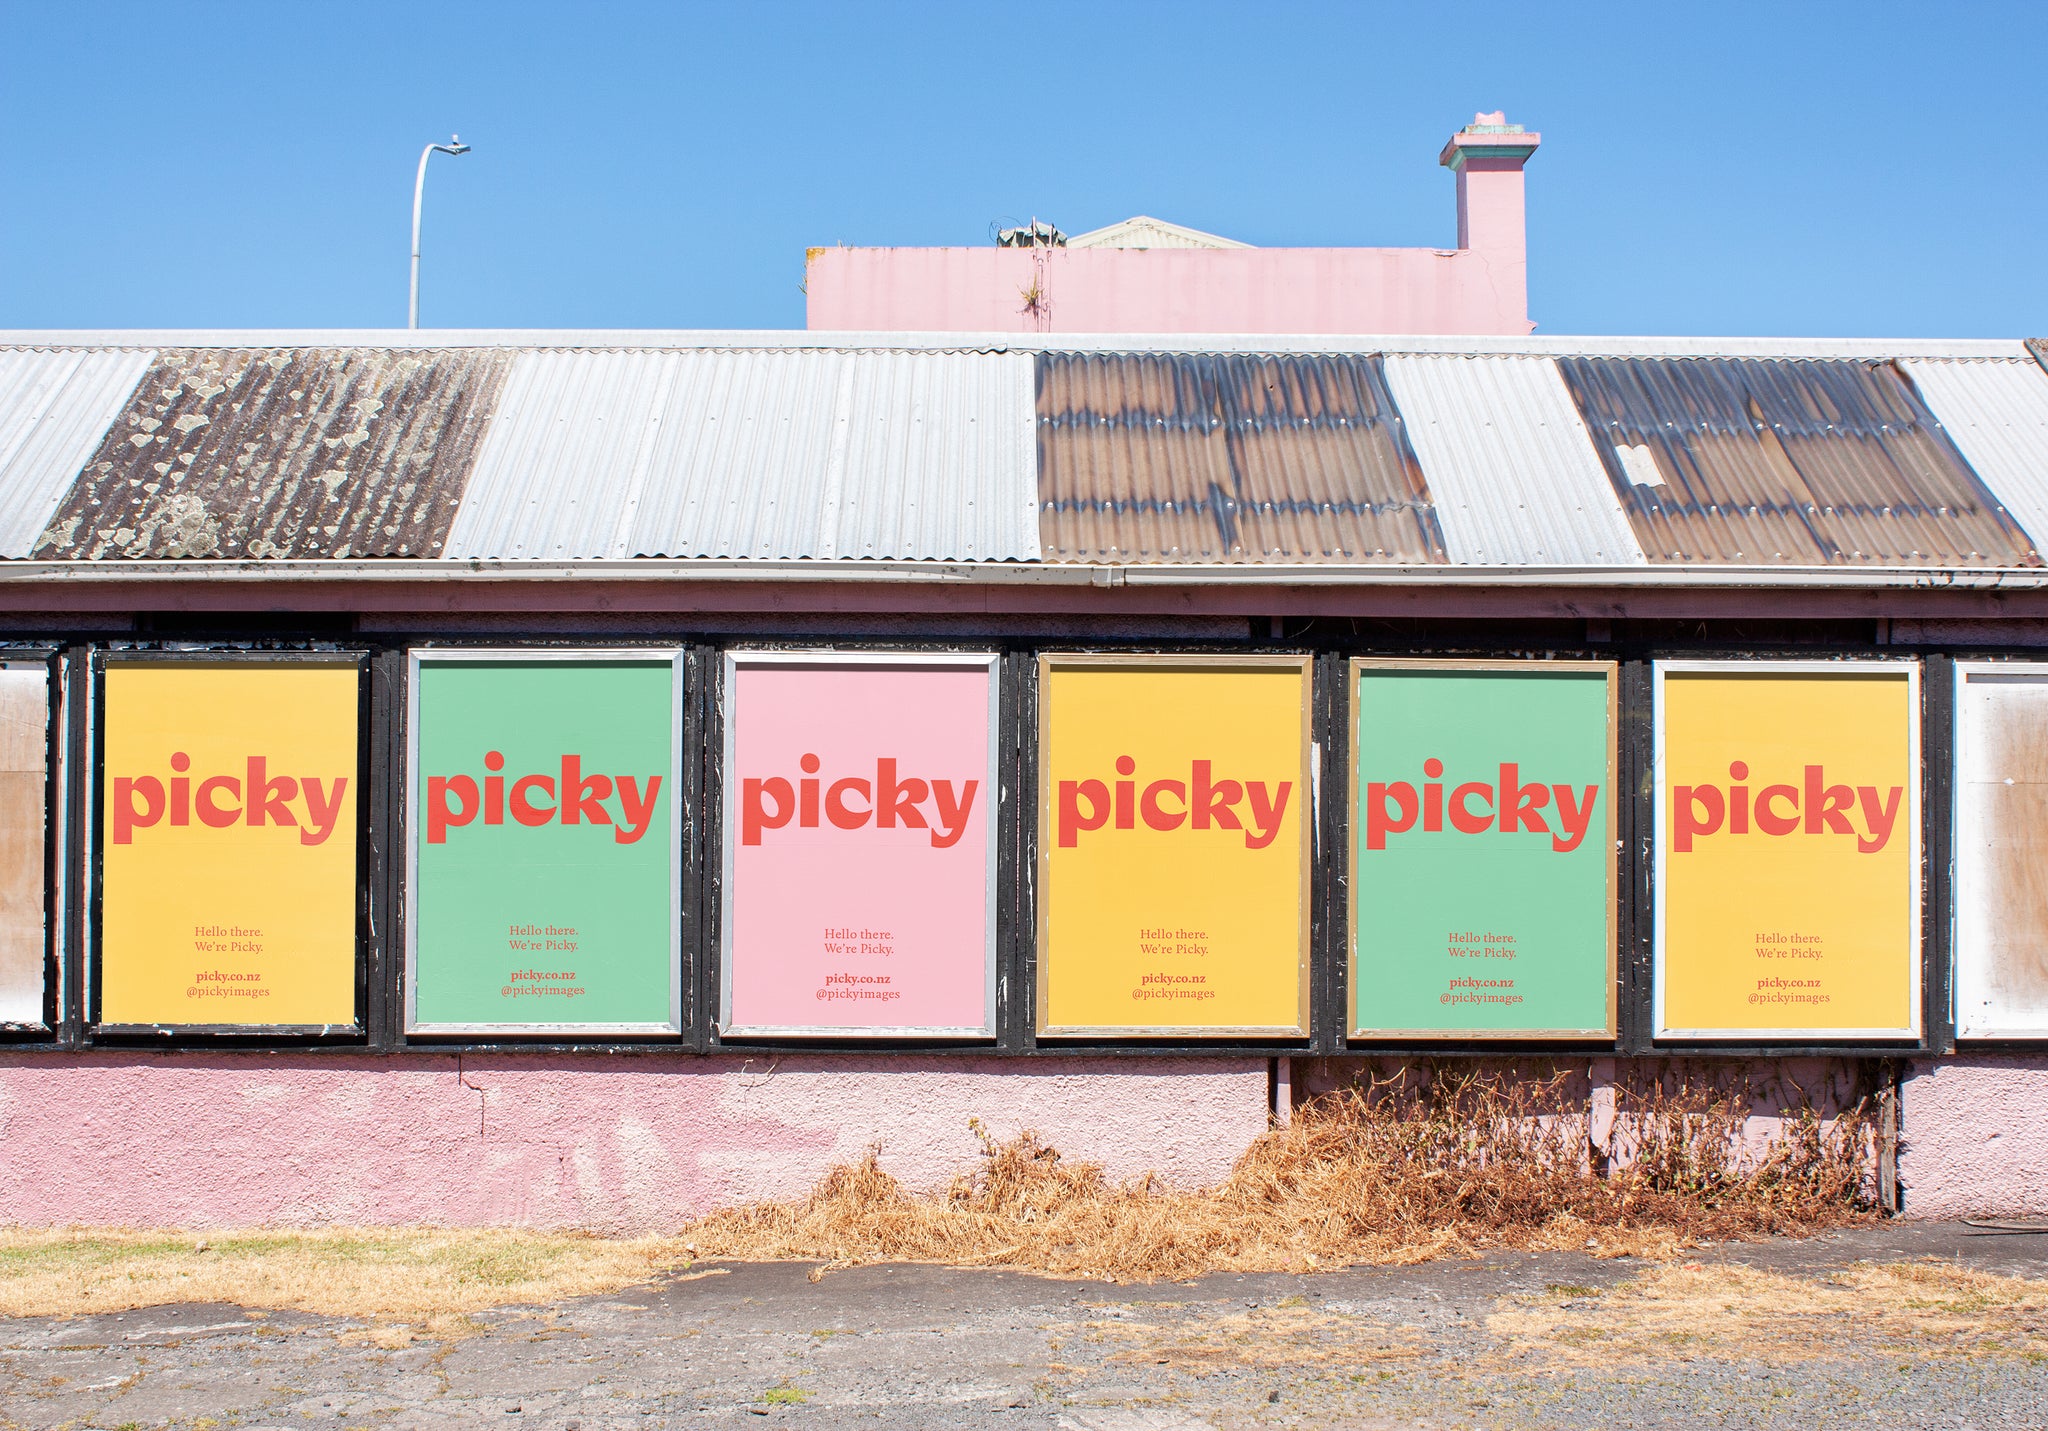 A poster location on a pink building and with a corregated iron roof. Dead weeds grow against this rustic setting.